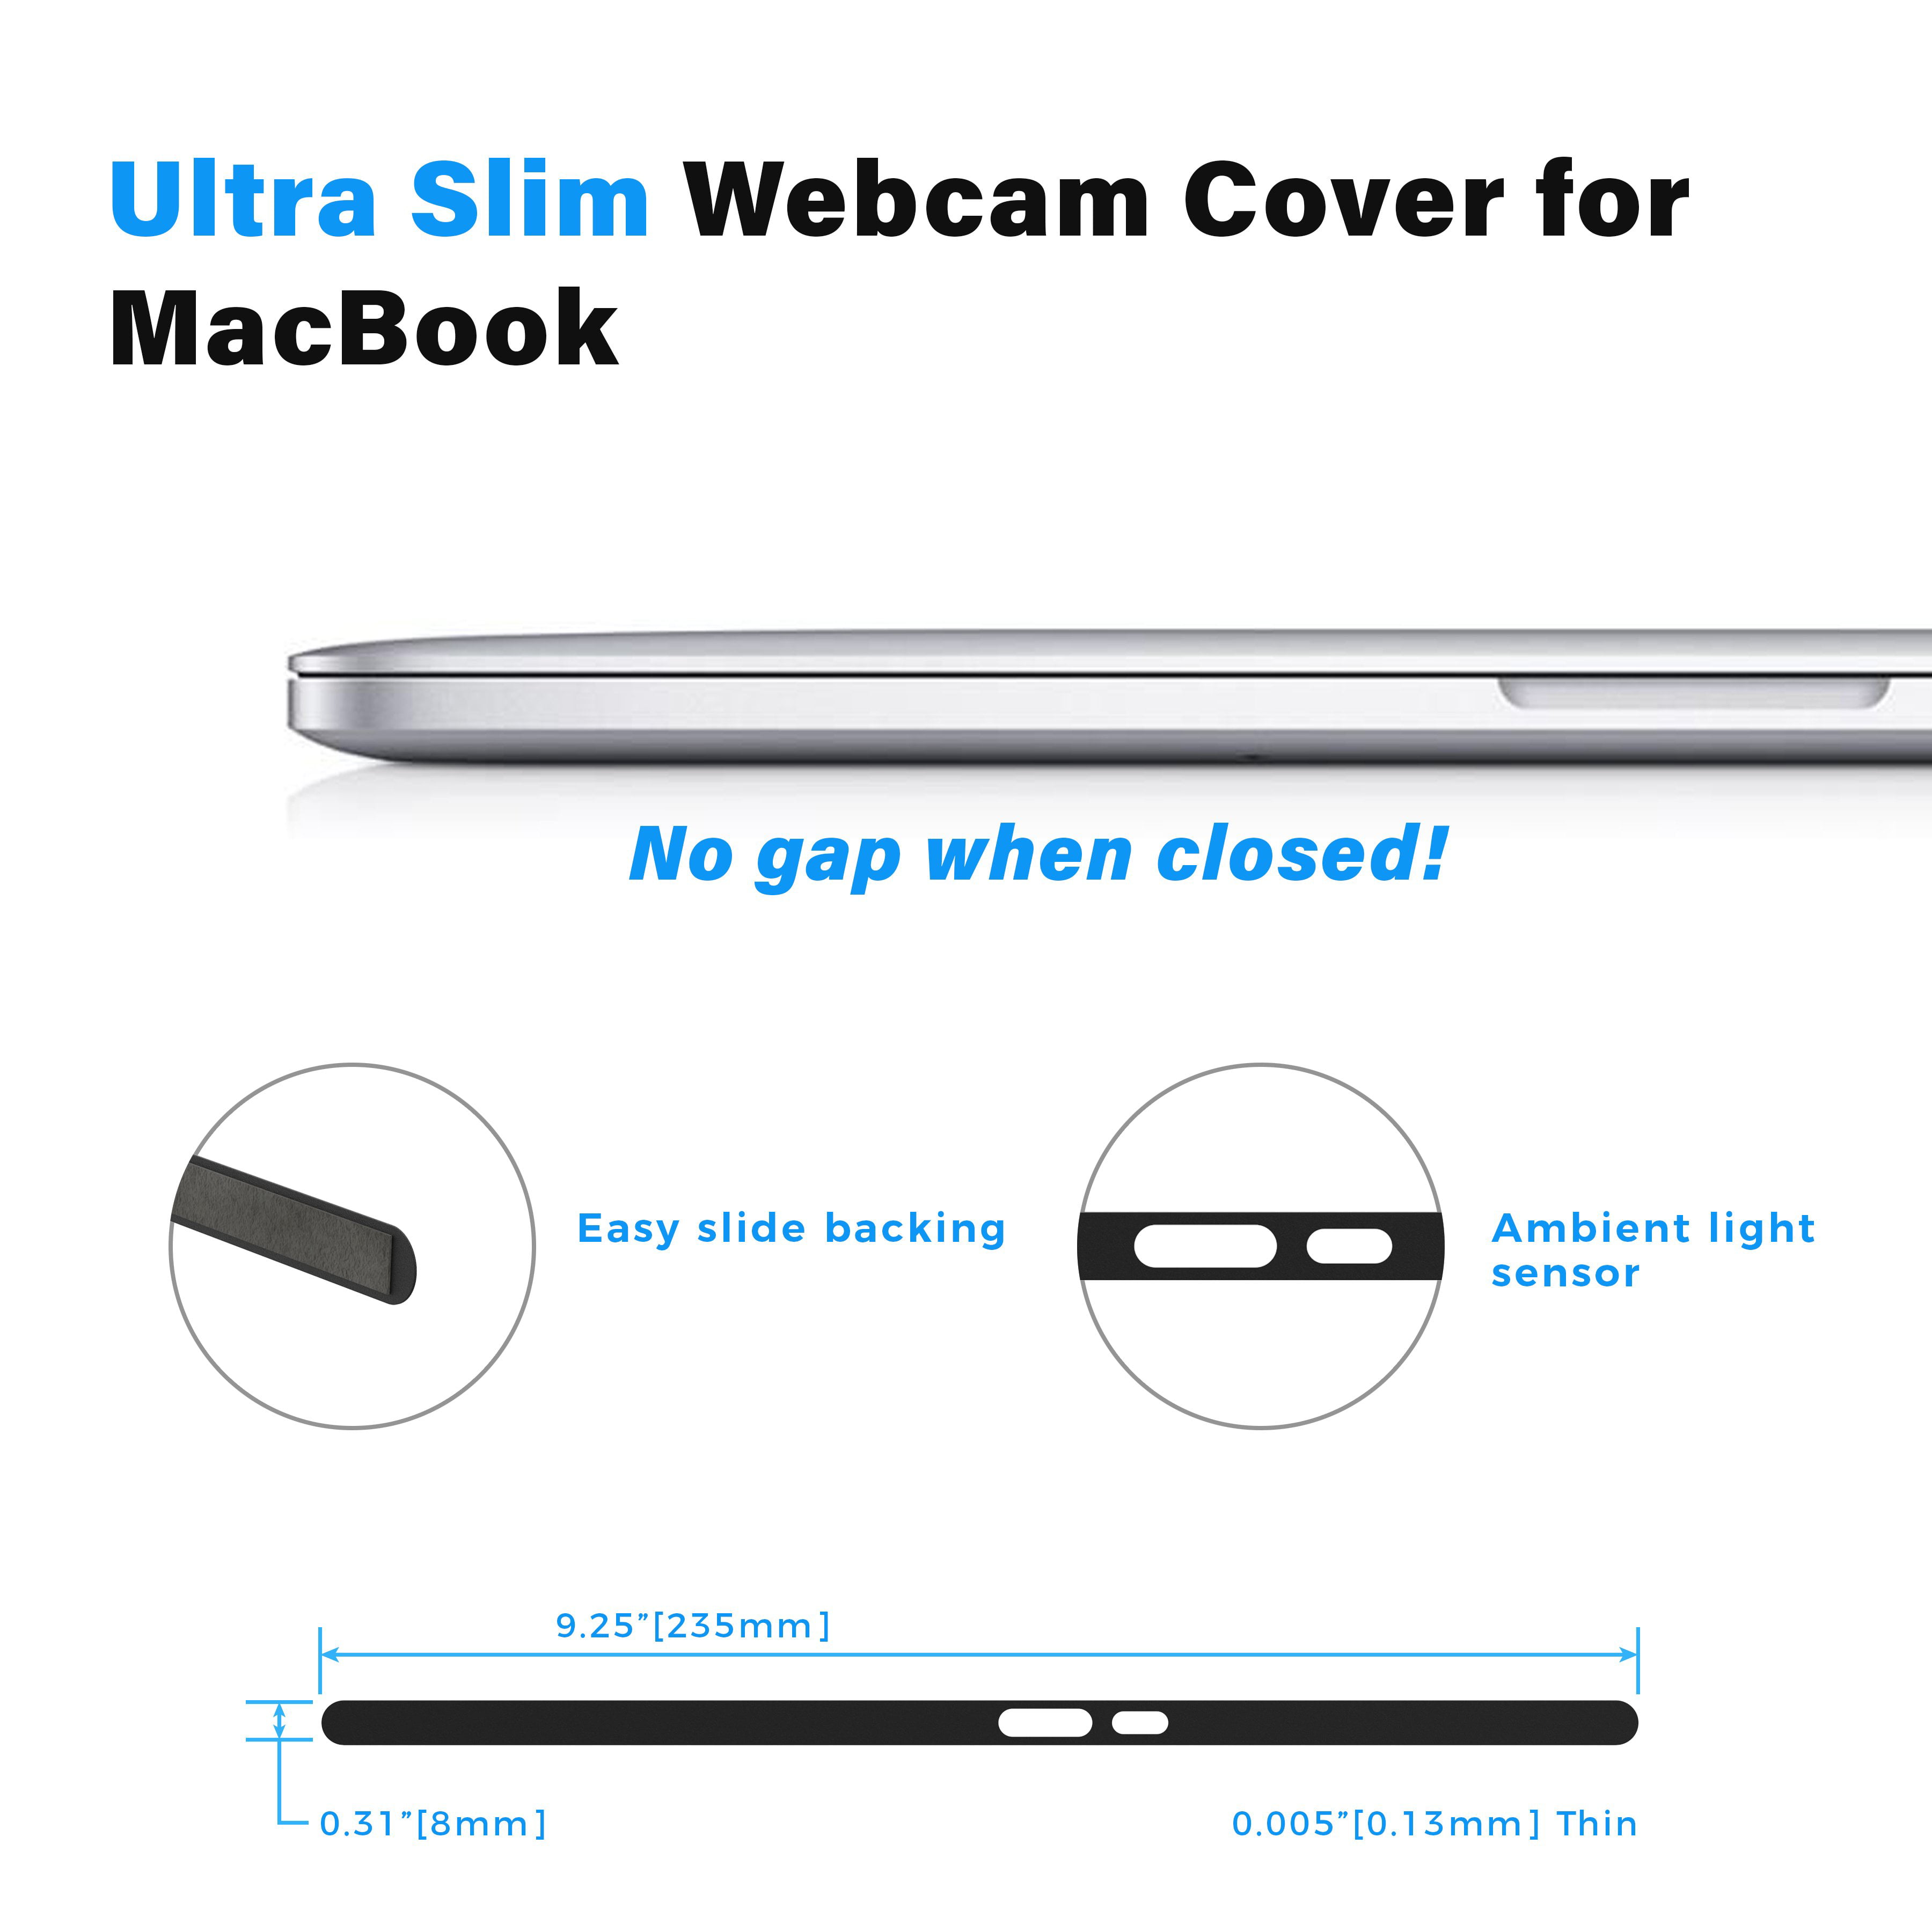 Professional Edition Eyebloc Webcam Cover for All MacBooks and MacBook Pros Patented Magnetic Slider Design Enables Light Sensor Stylish Protection